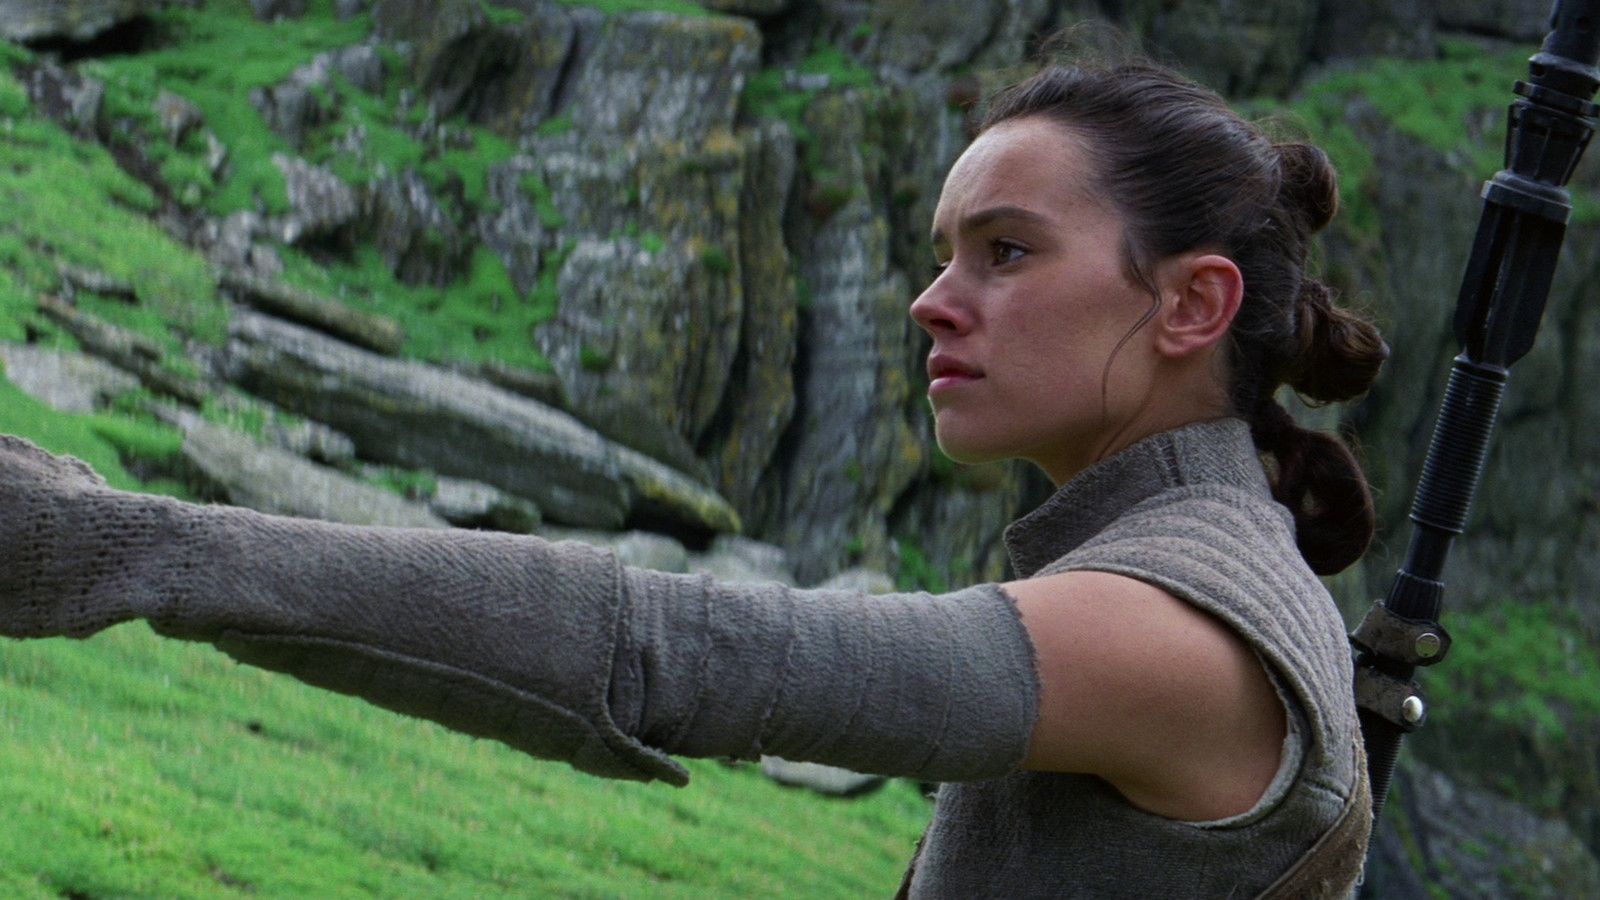 Rey's lightsaber in Star Wars: The Last Jedi is hers, but comes with interesting lineage